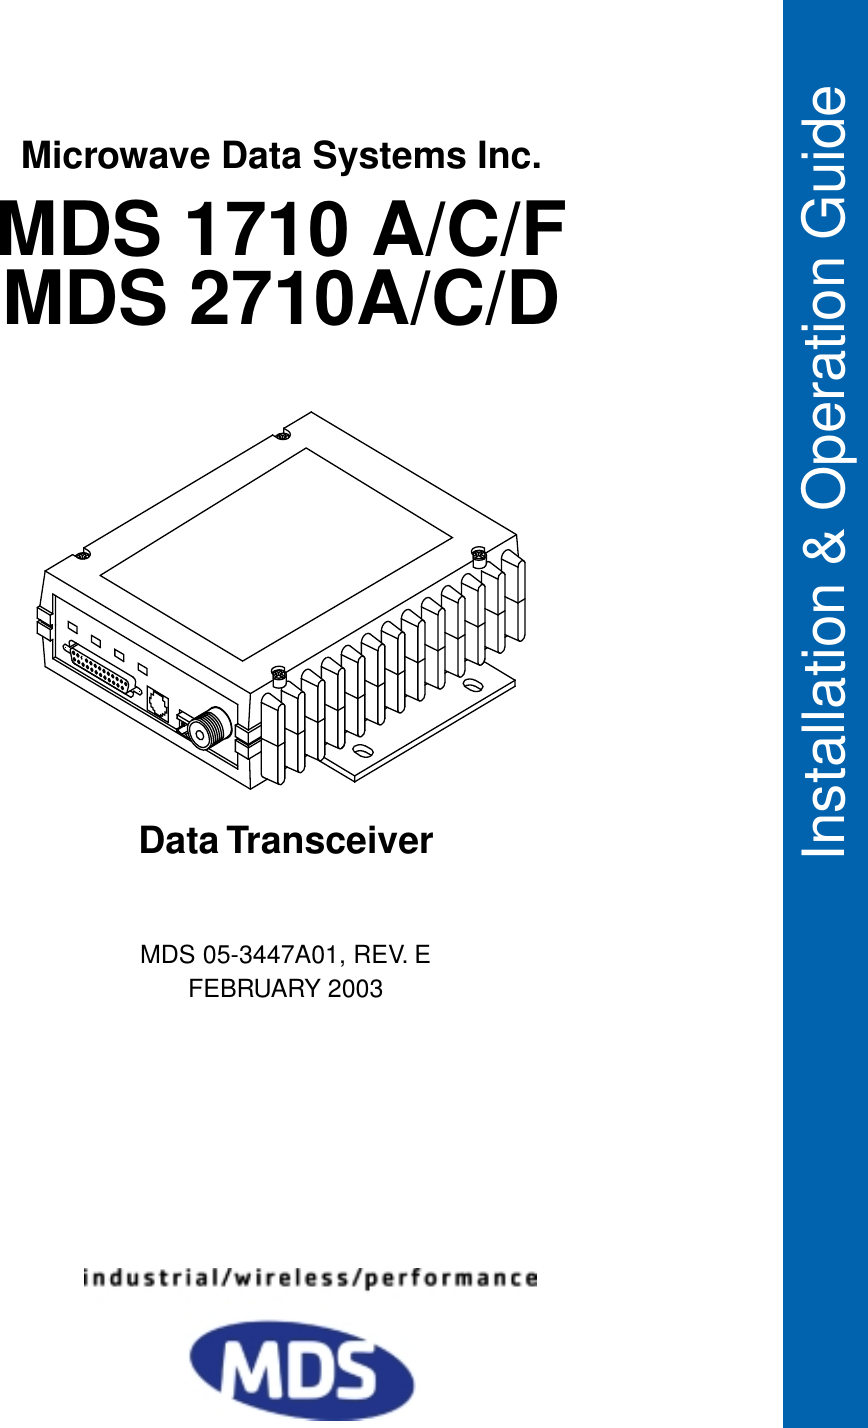  Installation &amp; Operation Guide MDS 05-3447A01, REV. E FEBRUARY 2003 Data TransceiverMicrowave Data Systems Inc. MDS 1710 A/C/FMDS 2710A/C/D